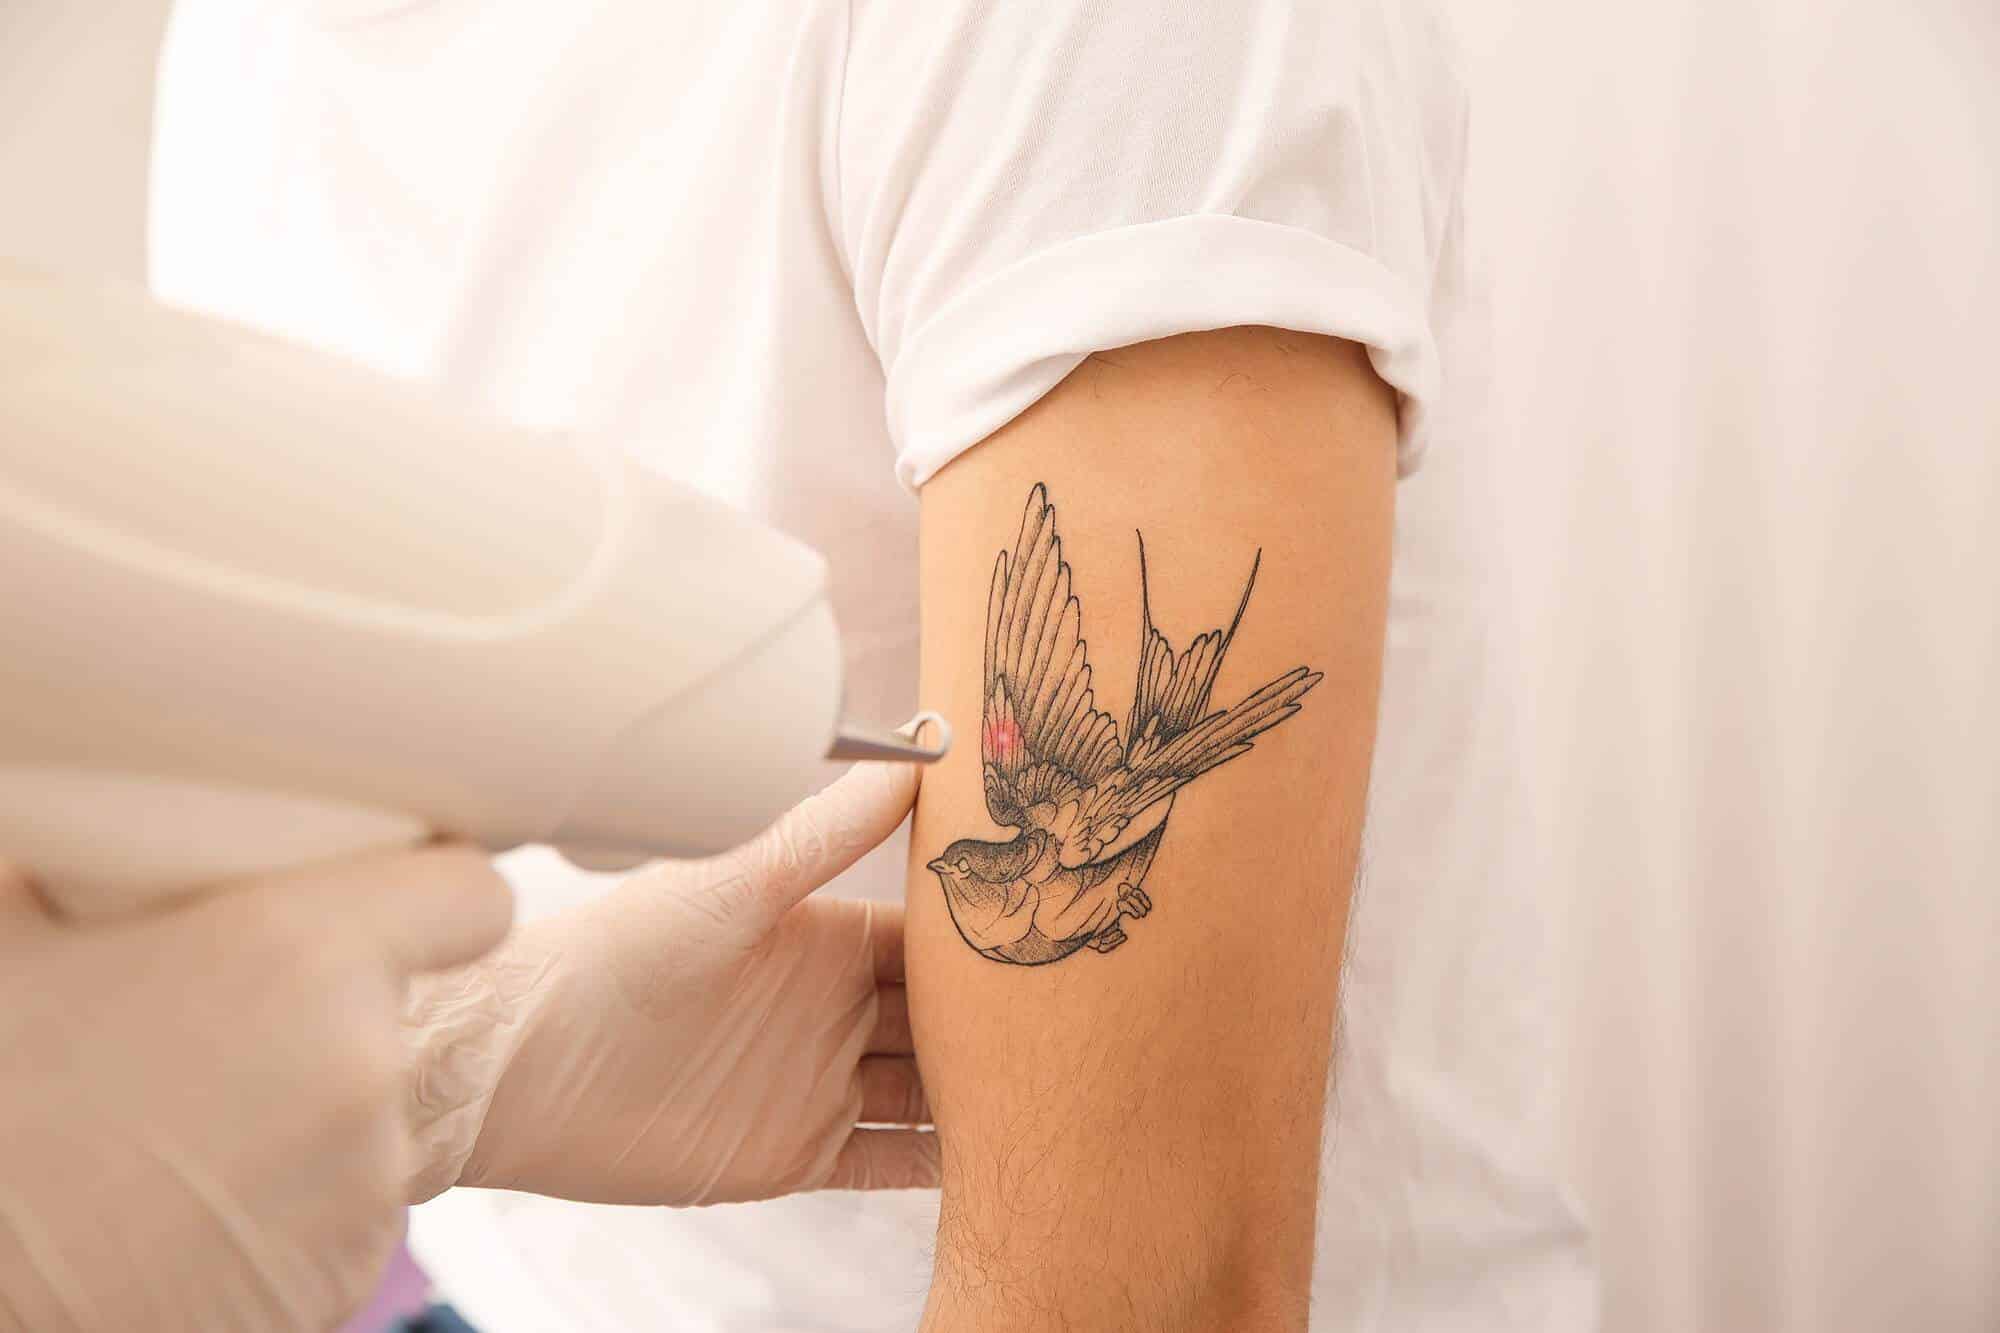 How Pico Laser Helps Remove Tattoos In Singapore